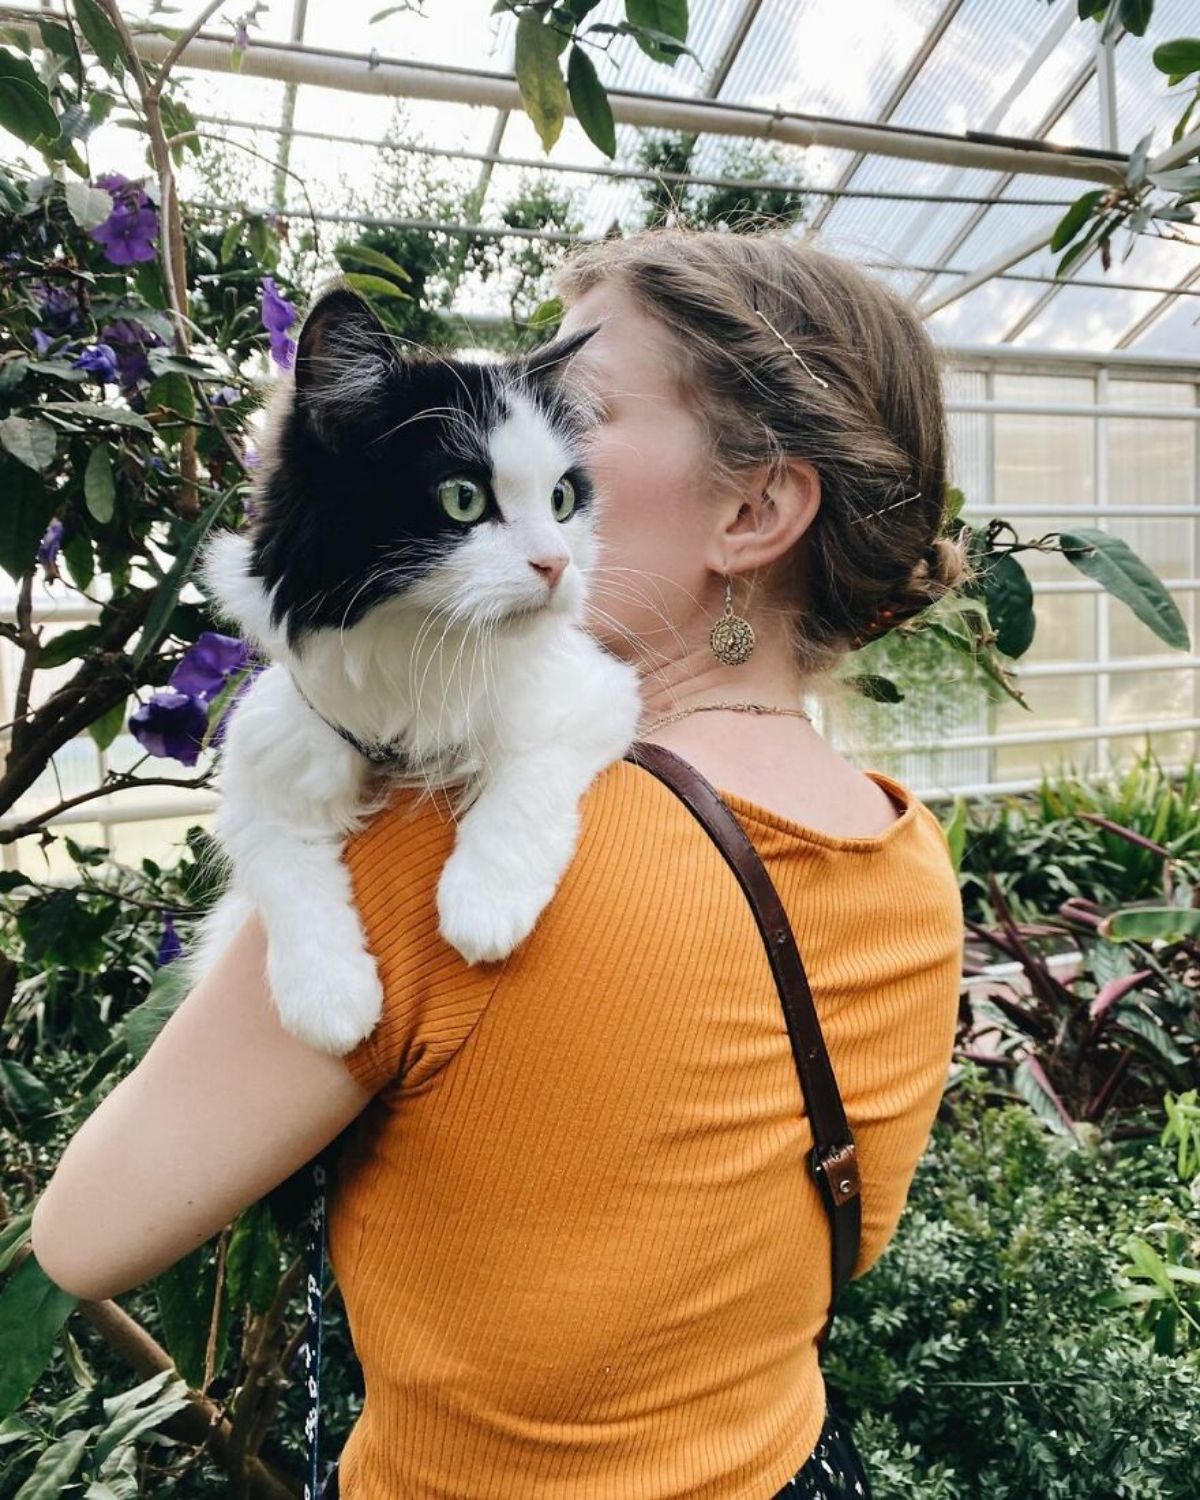 black and white fluffy cat on someone's shoulder in a greenhouse or nursery next to purple flower plants